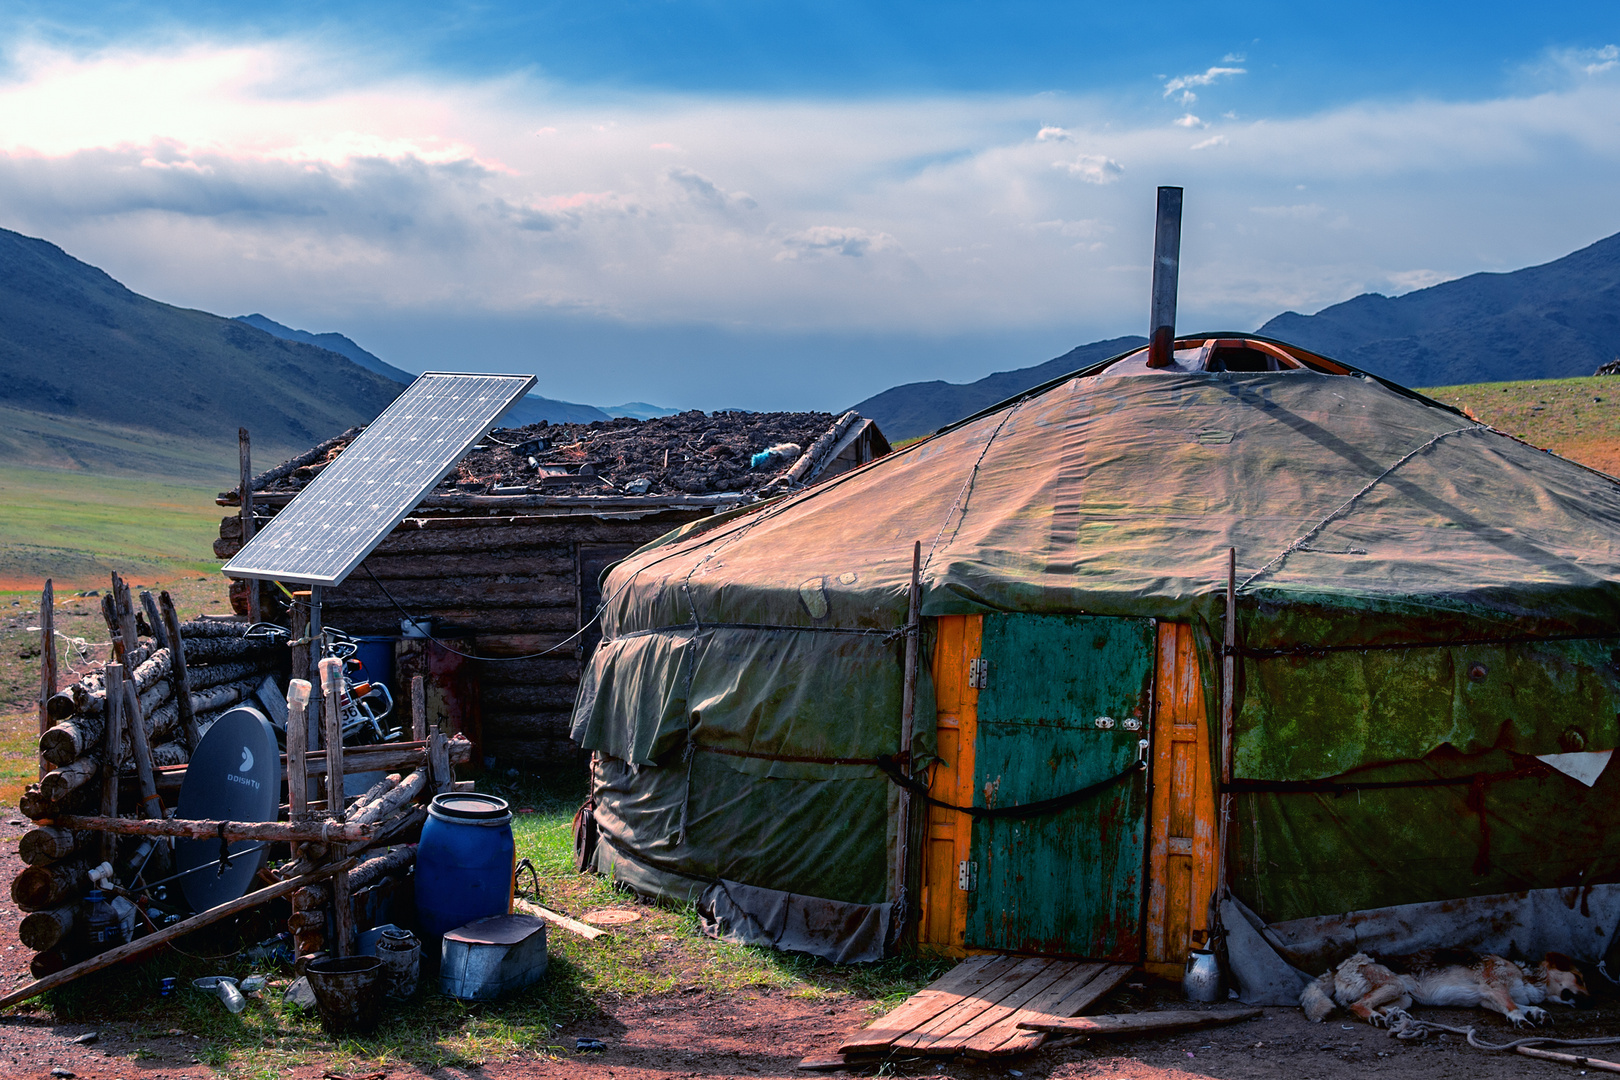 Nomads living in the steppe